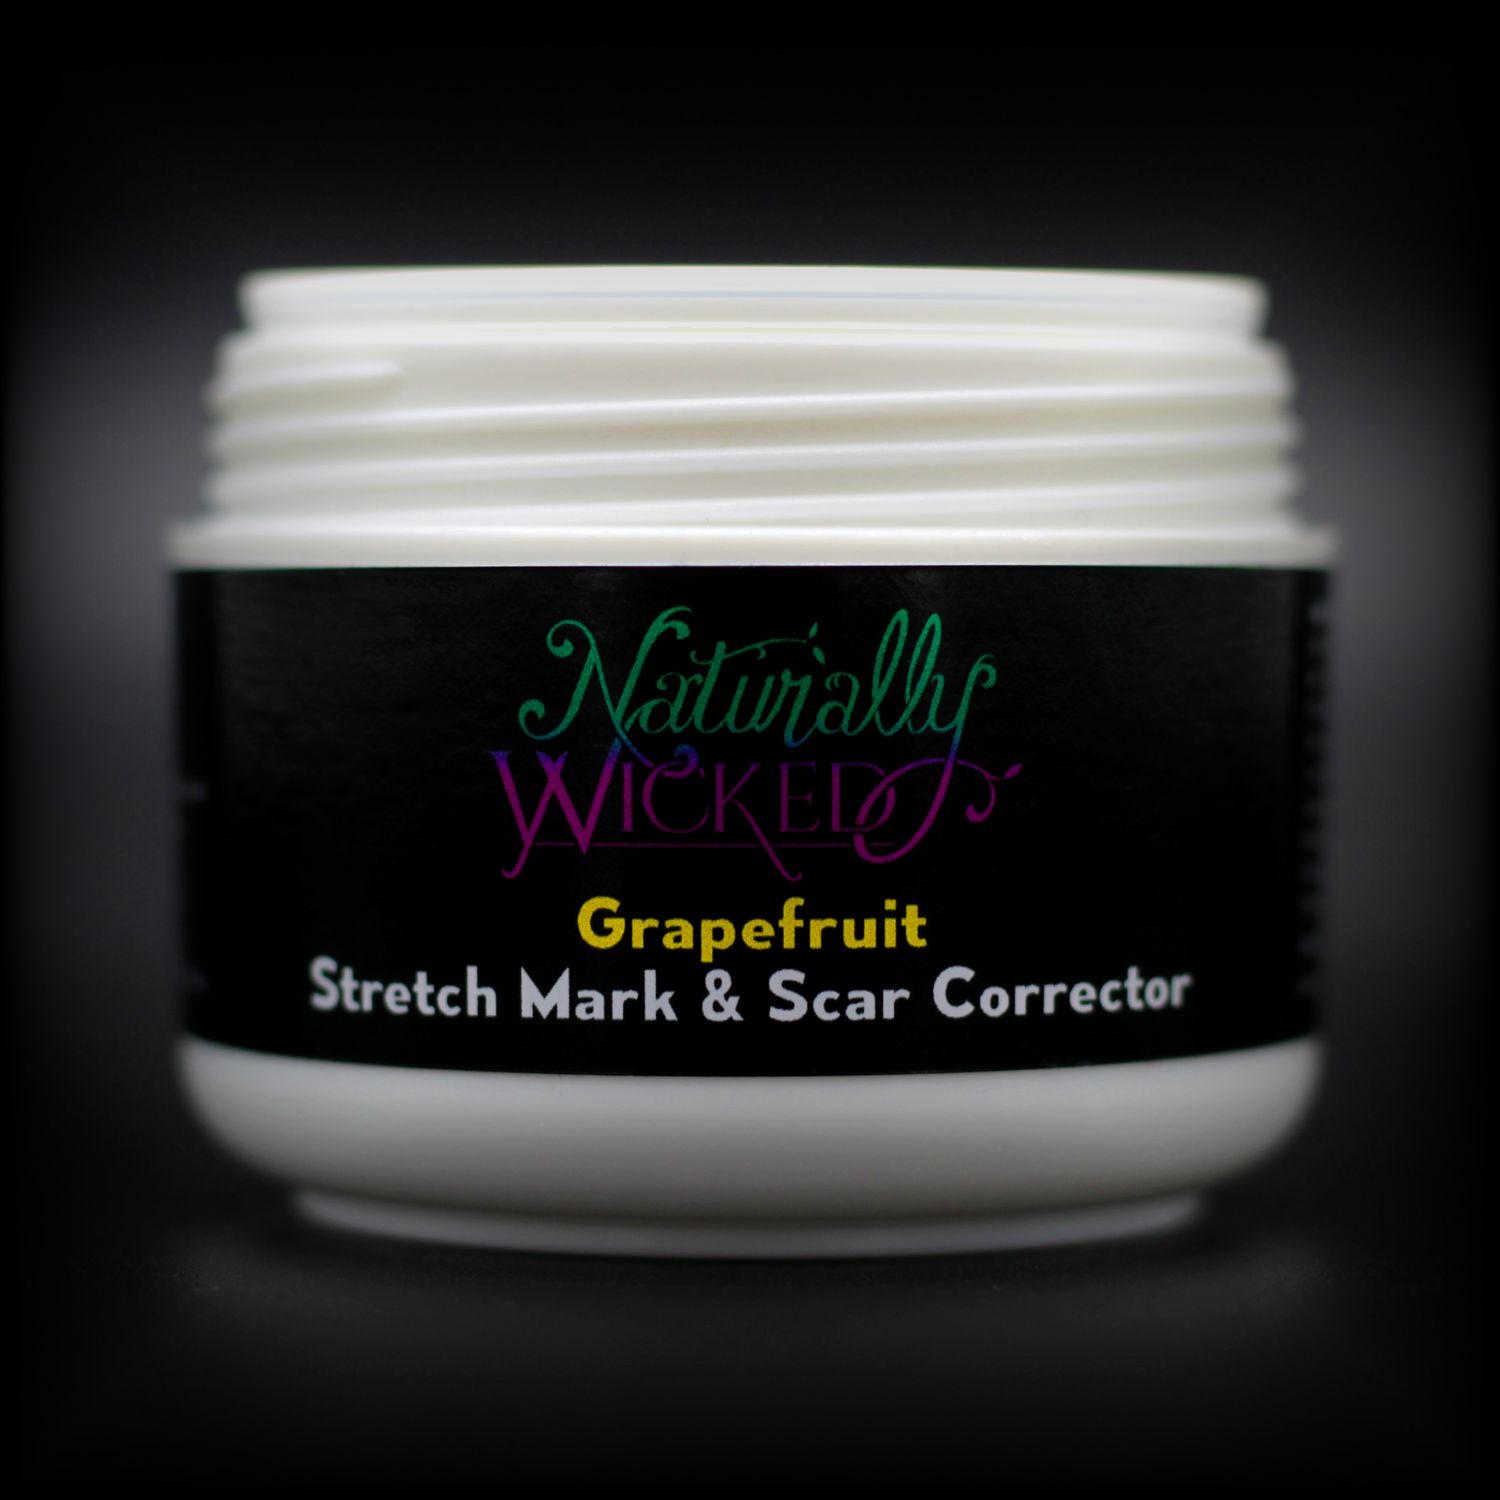 Naturally Wicked Grapefruit Stretch Mark & Scar Corrector Without Lid Exposing Seal & Screw Connection